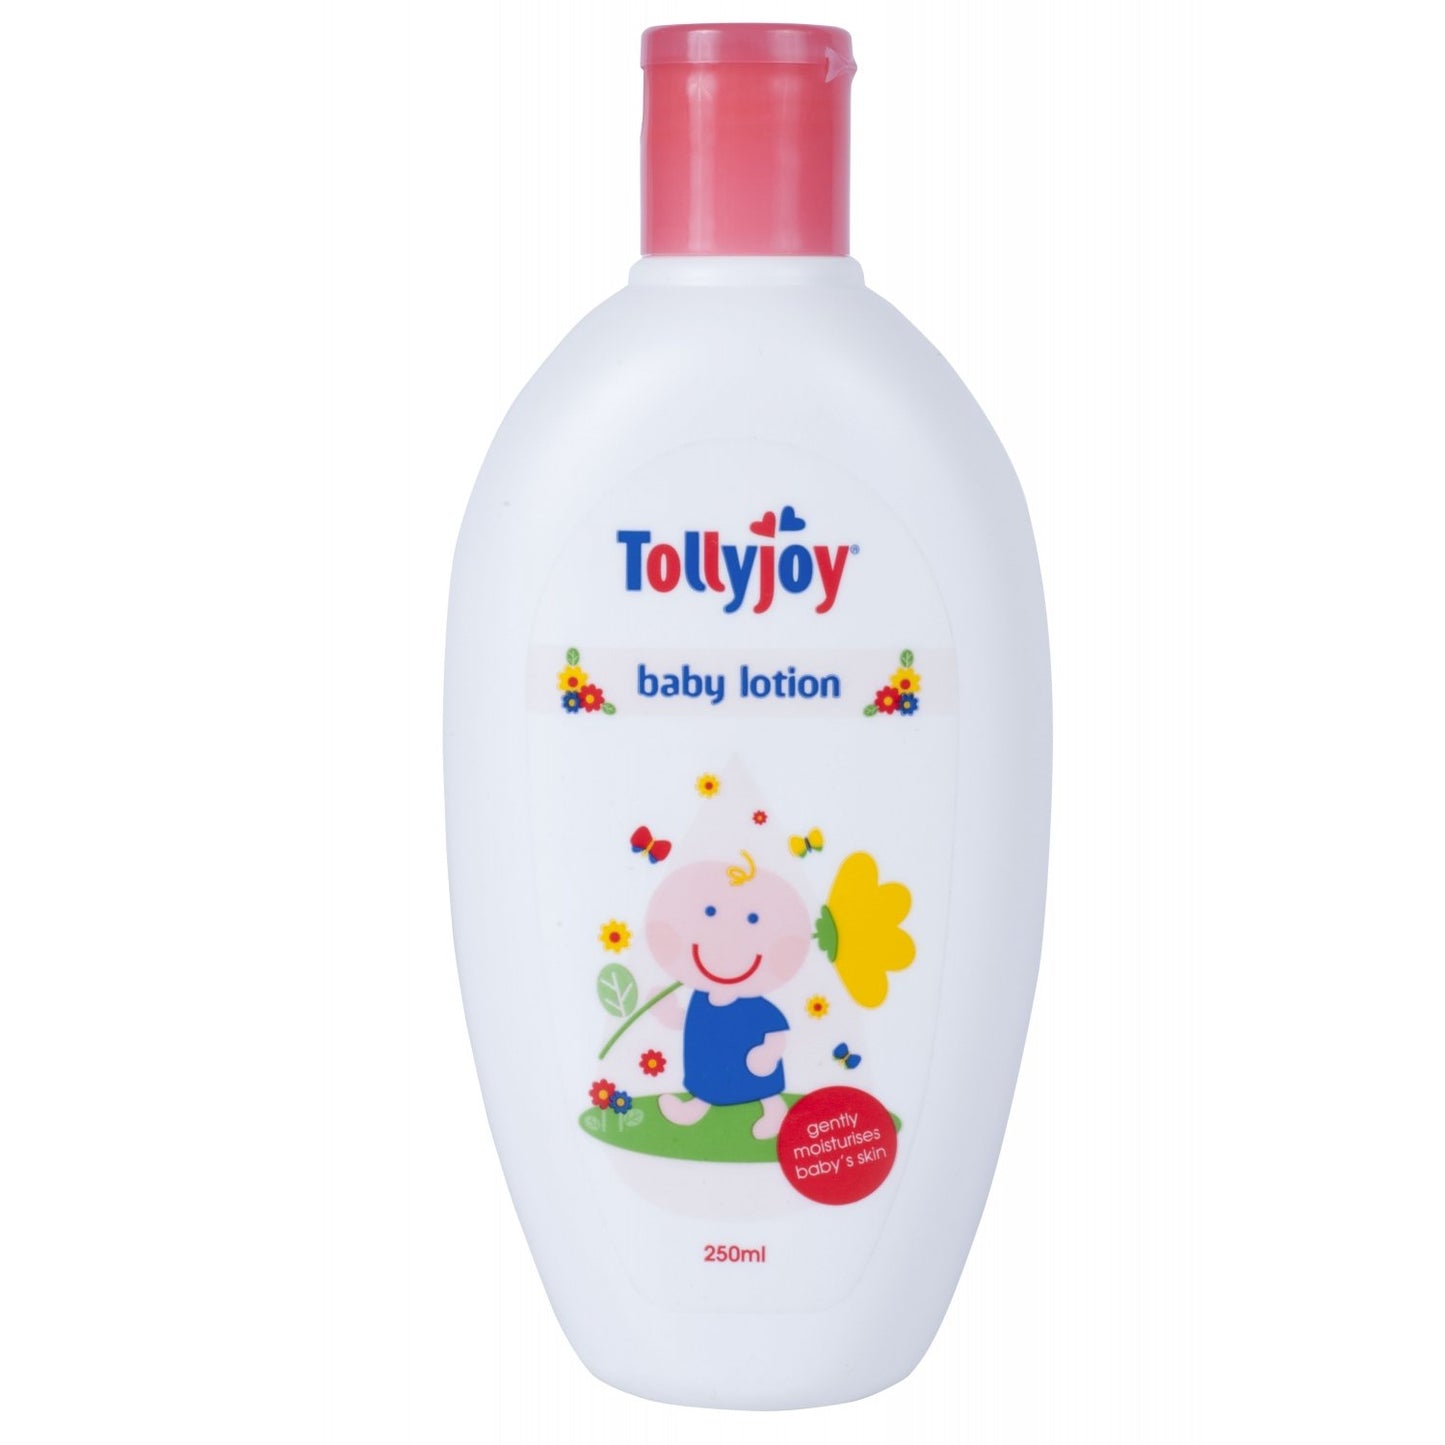 Tollyjoy Baby Lotion (250ml)